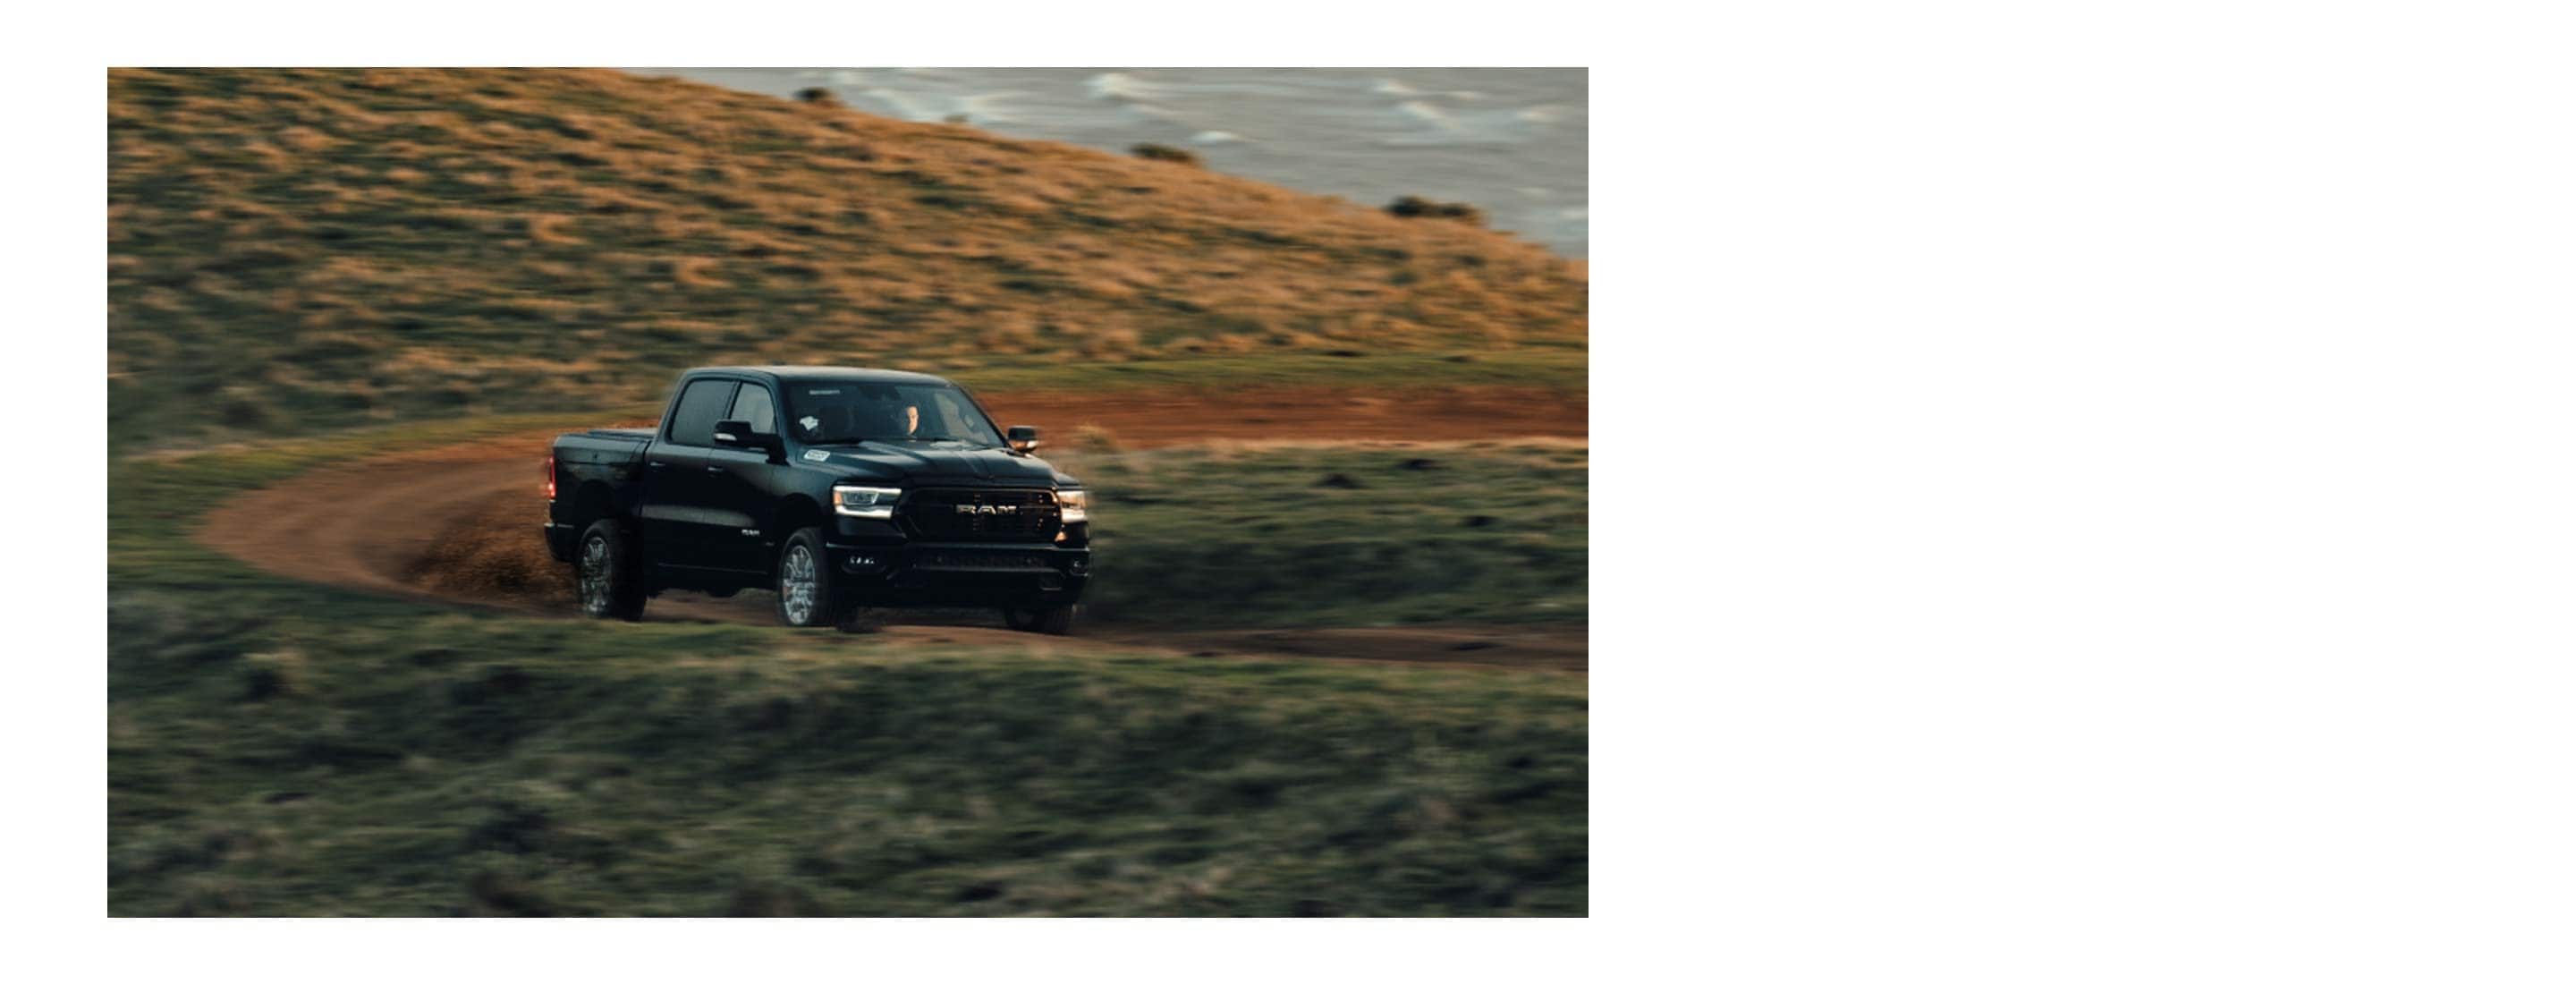 The 2022 Ram 1500 being driven on a winding dirt road.